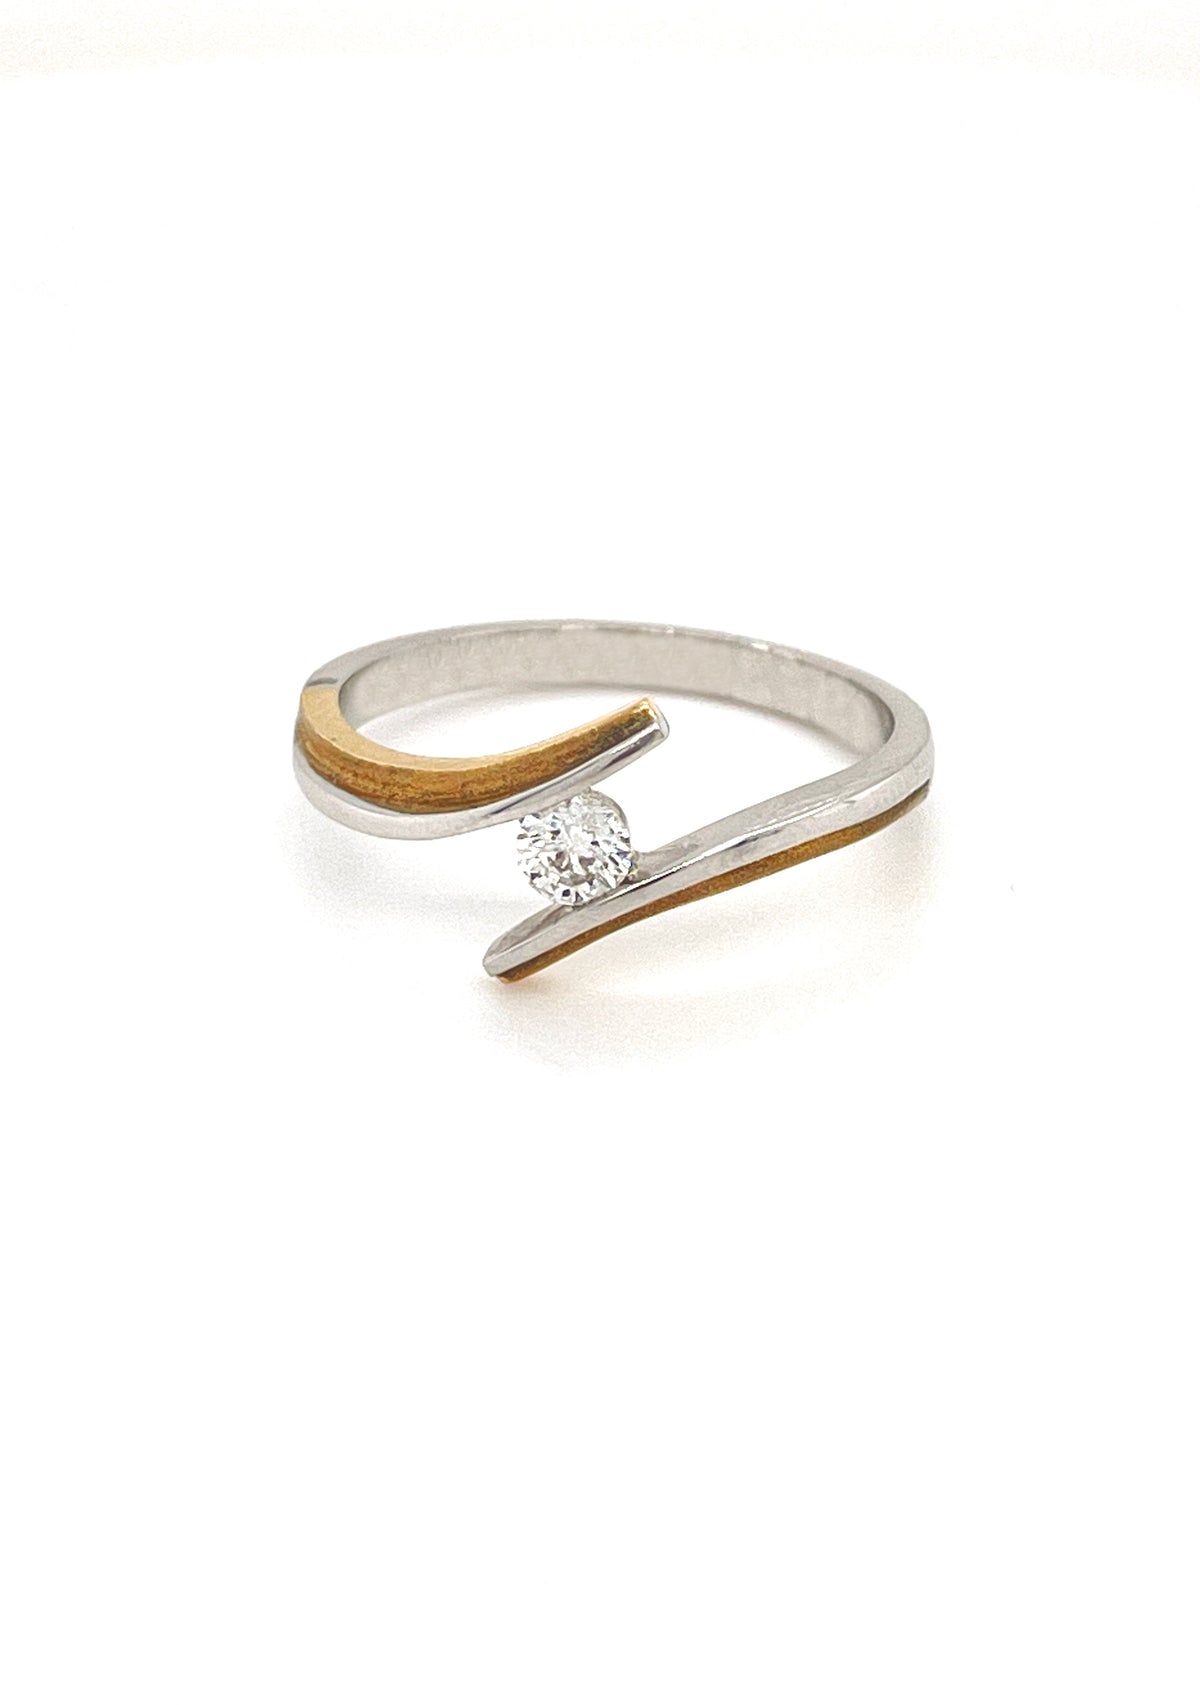 0.15CT Diamond Solitaire Ring In 10K Yellow And White Gold